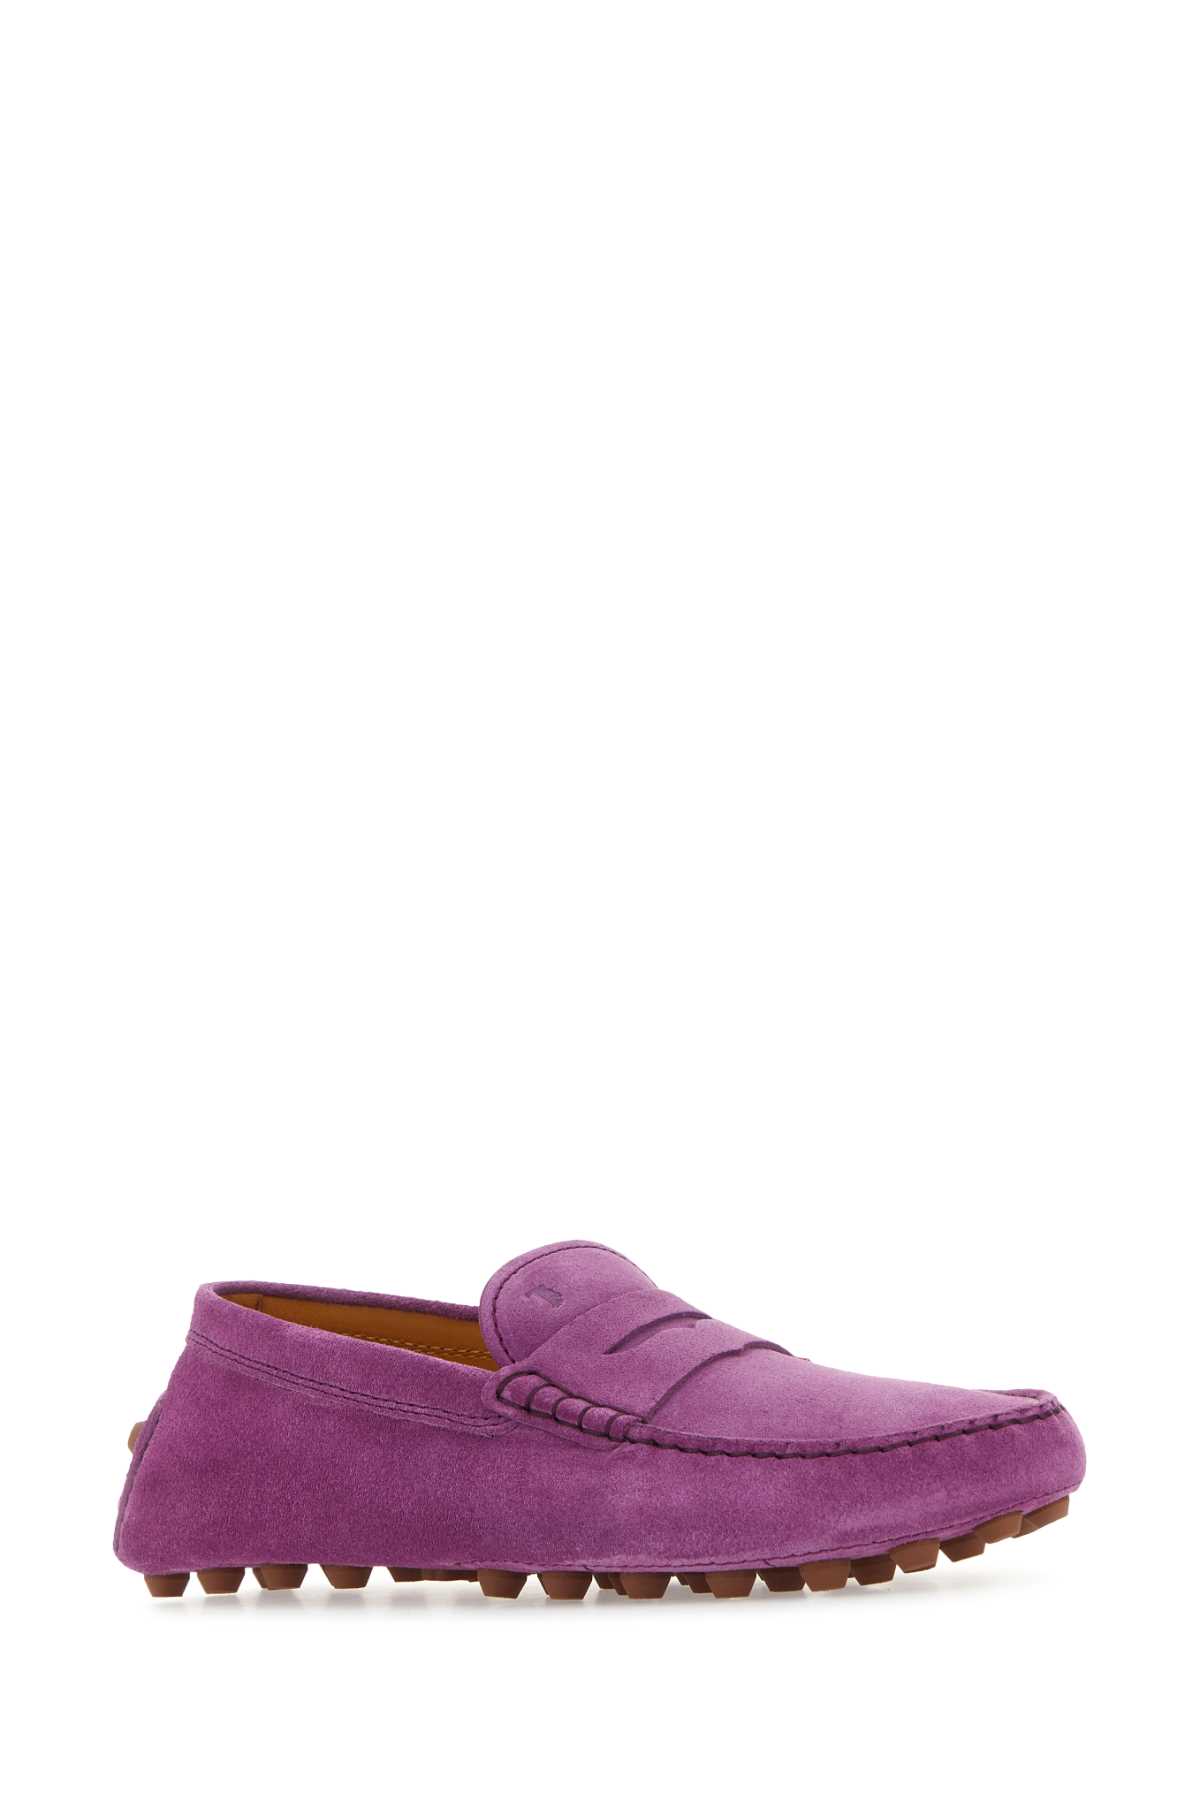 TOD'S PURPLE SUEDE GOMMINO LOAFERS